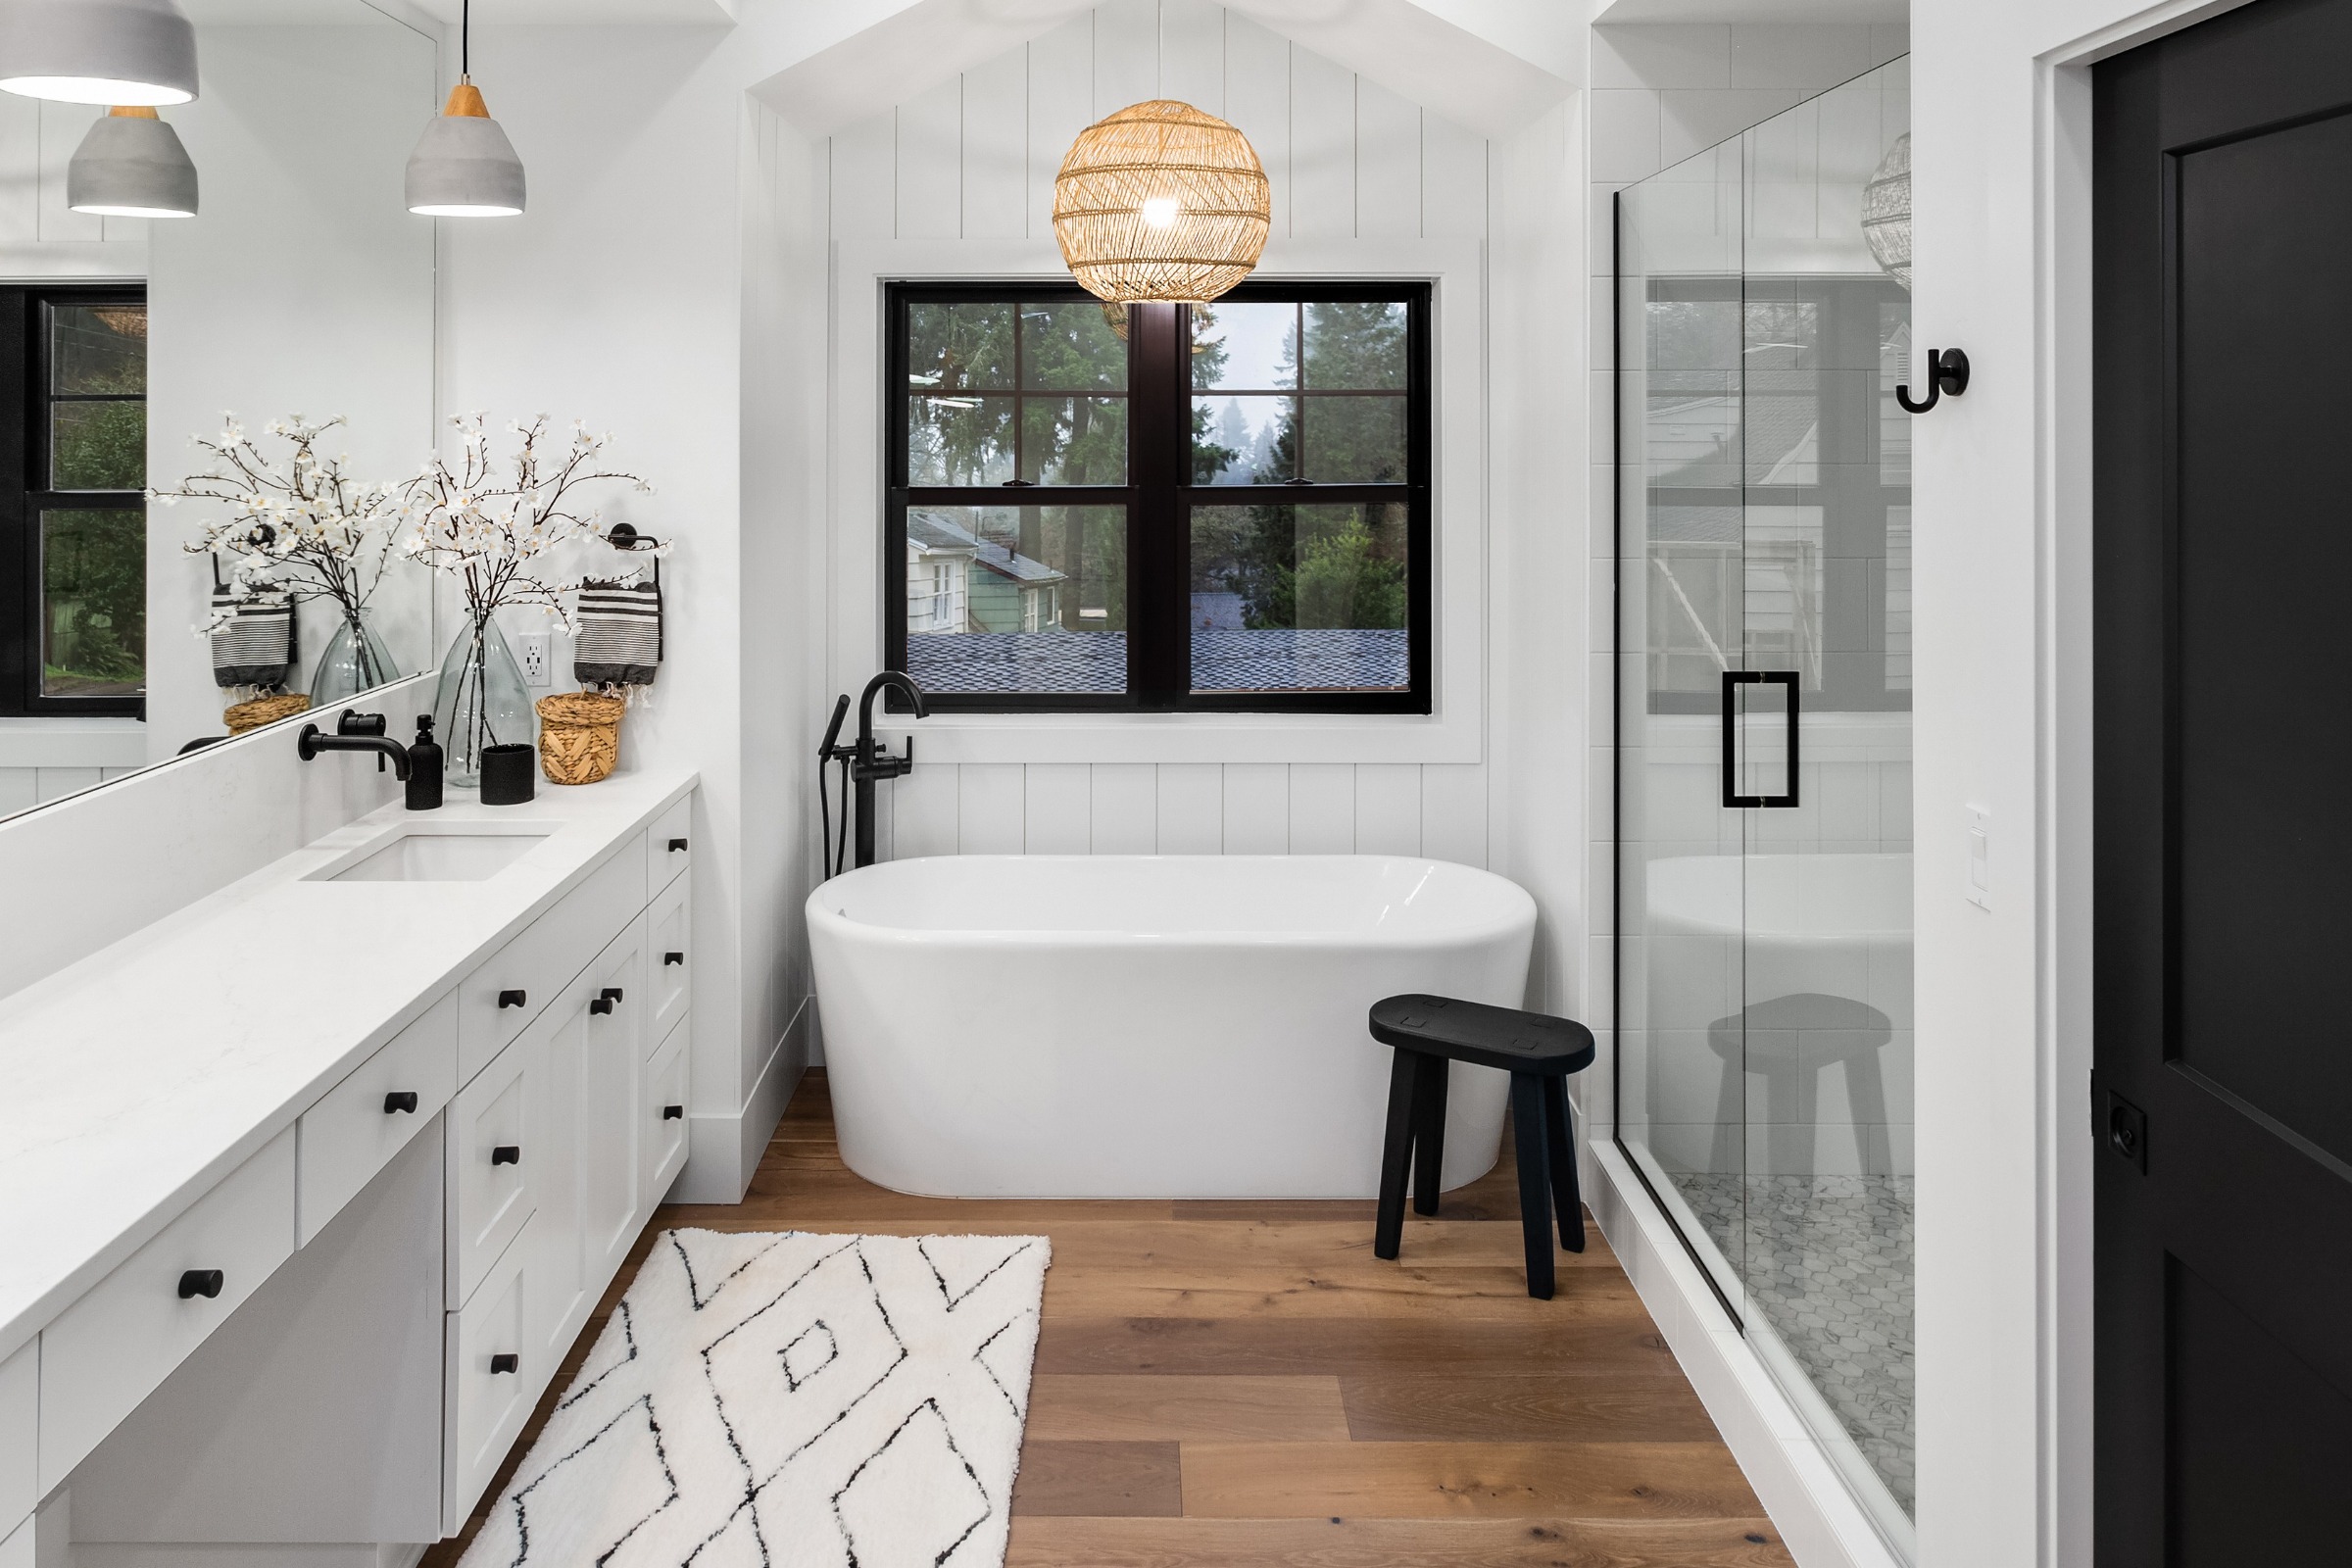 Modern bathroom with white freestanding tub, double vanity, and black accents.